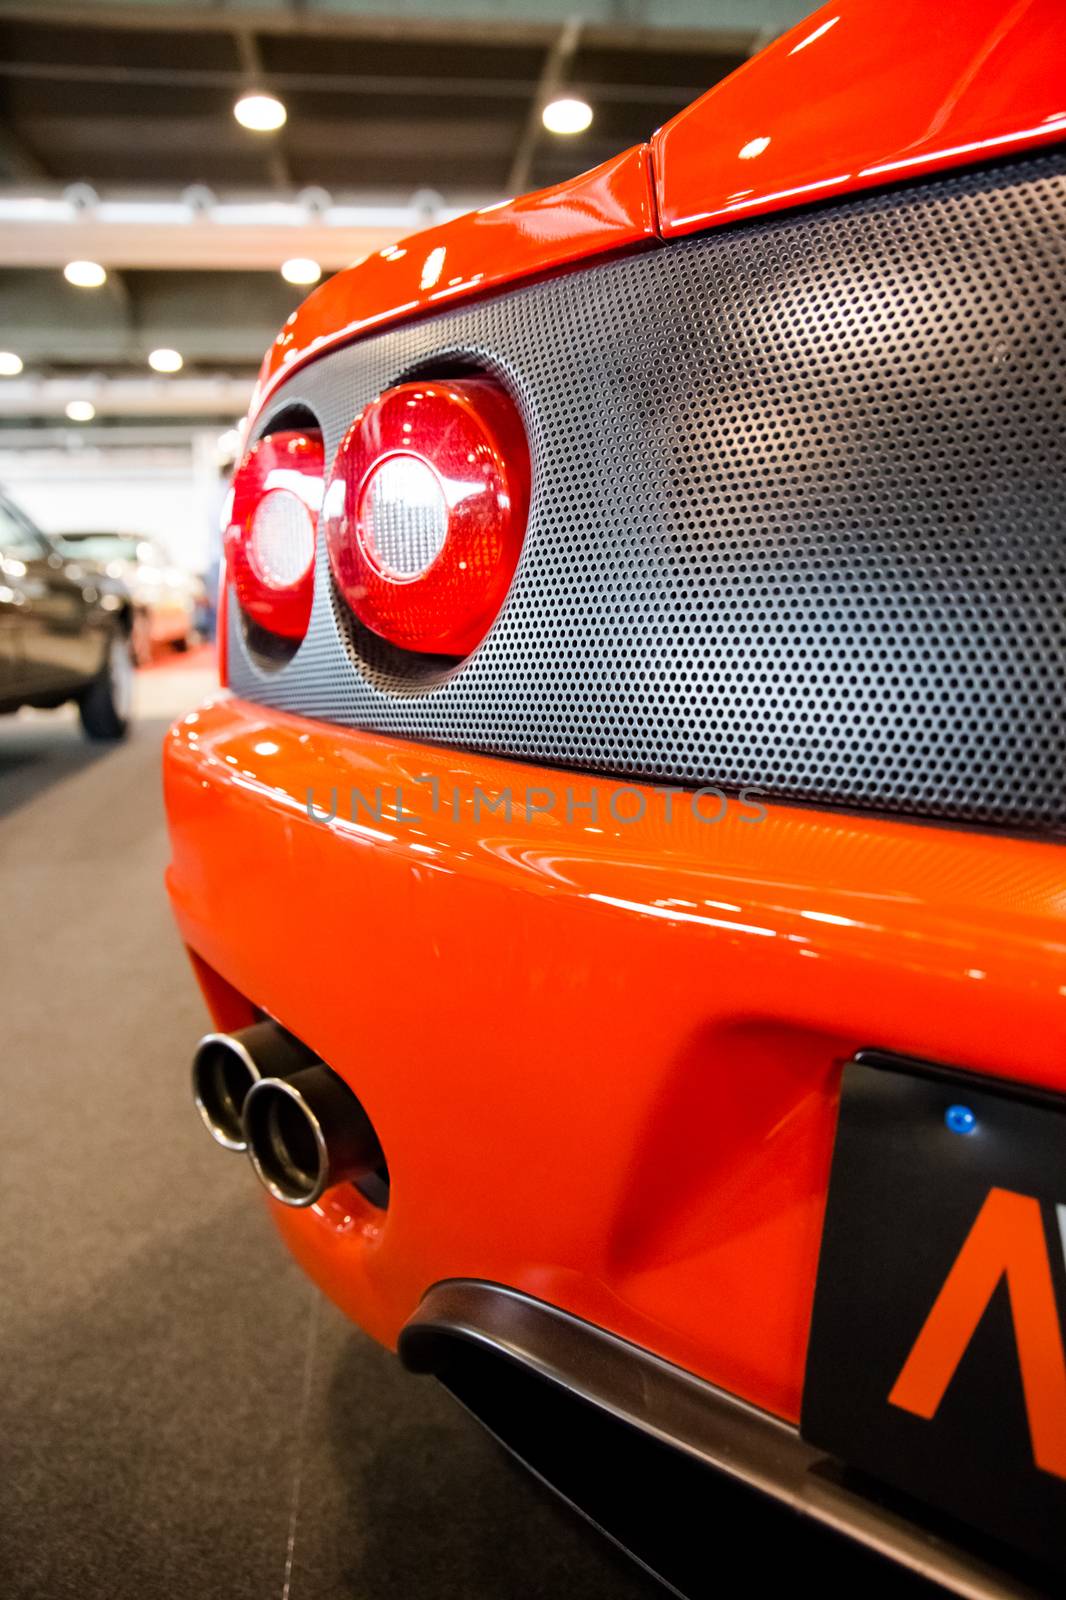 exhaust pipes and tail lights of an orange sports car by Isaac74